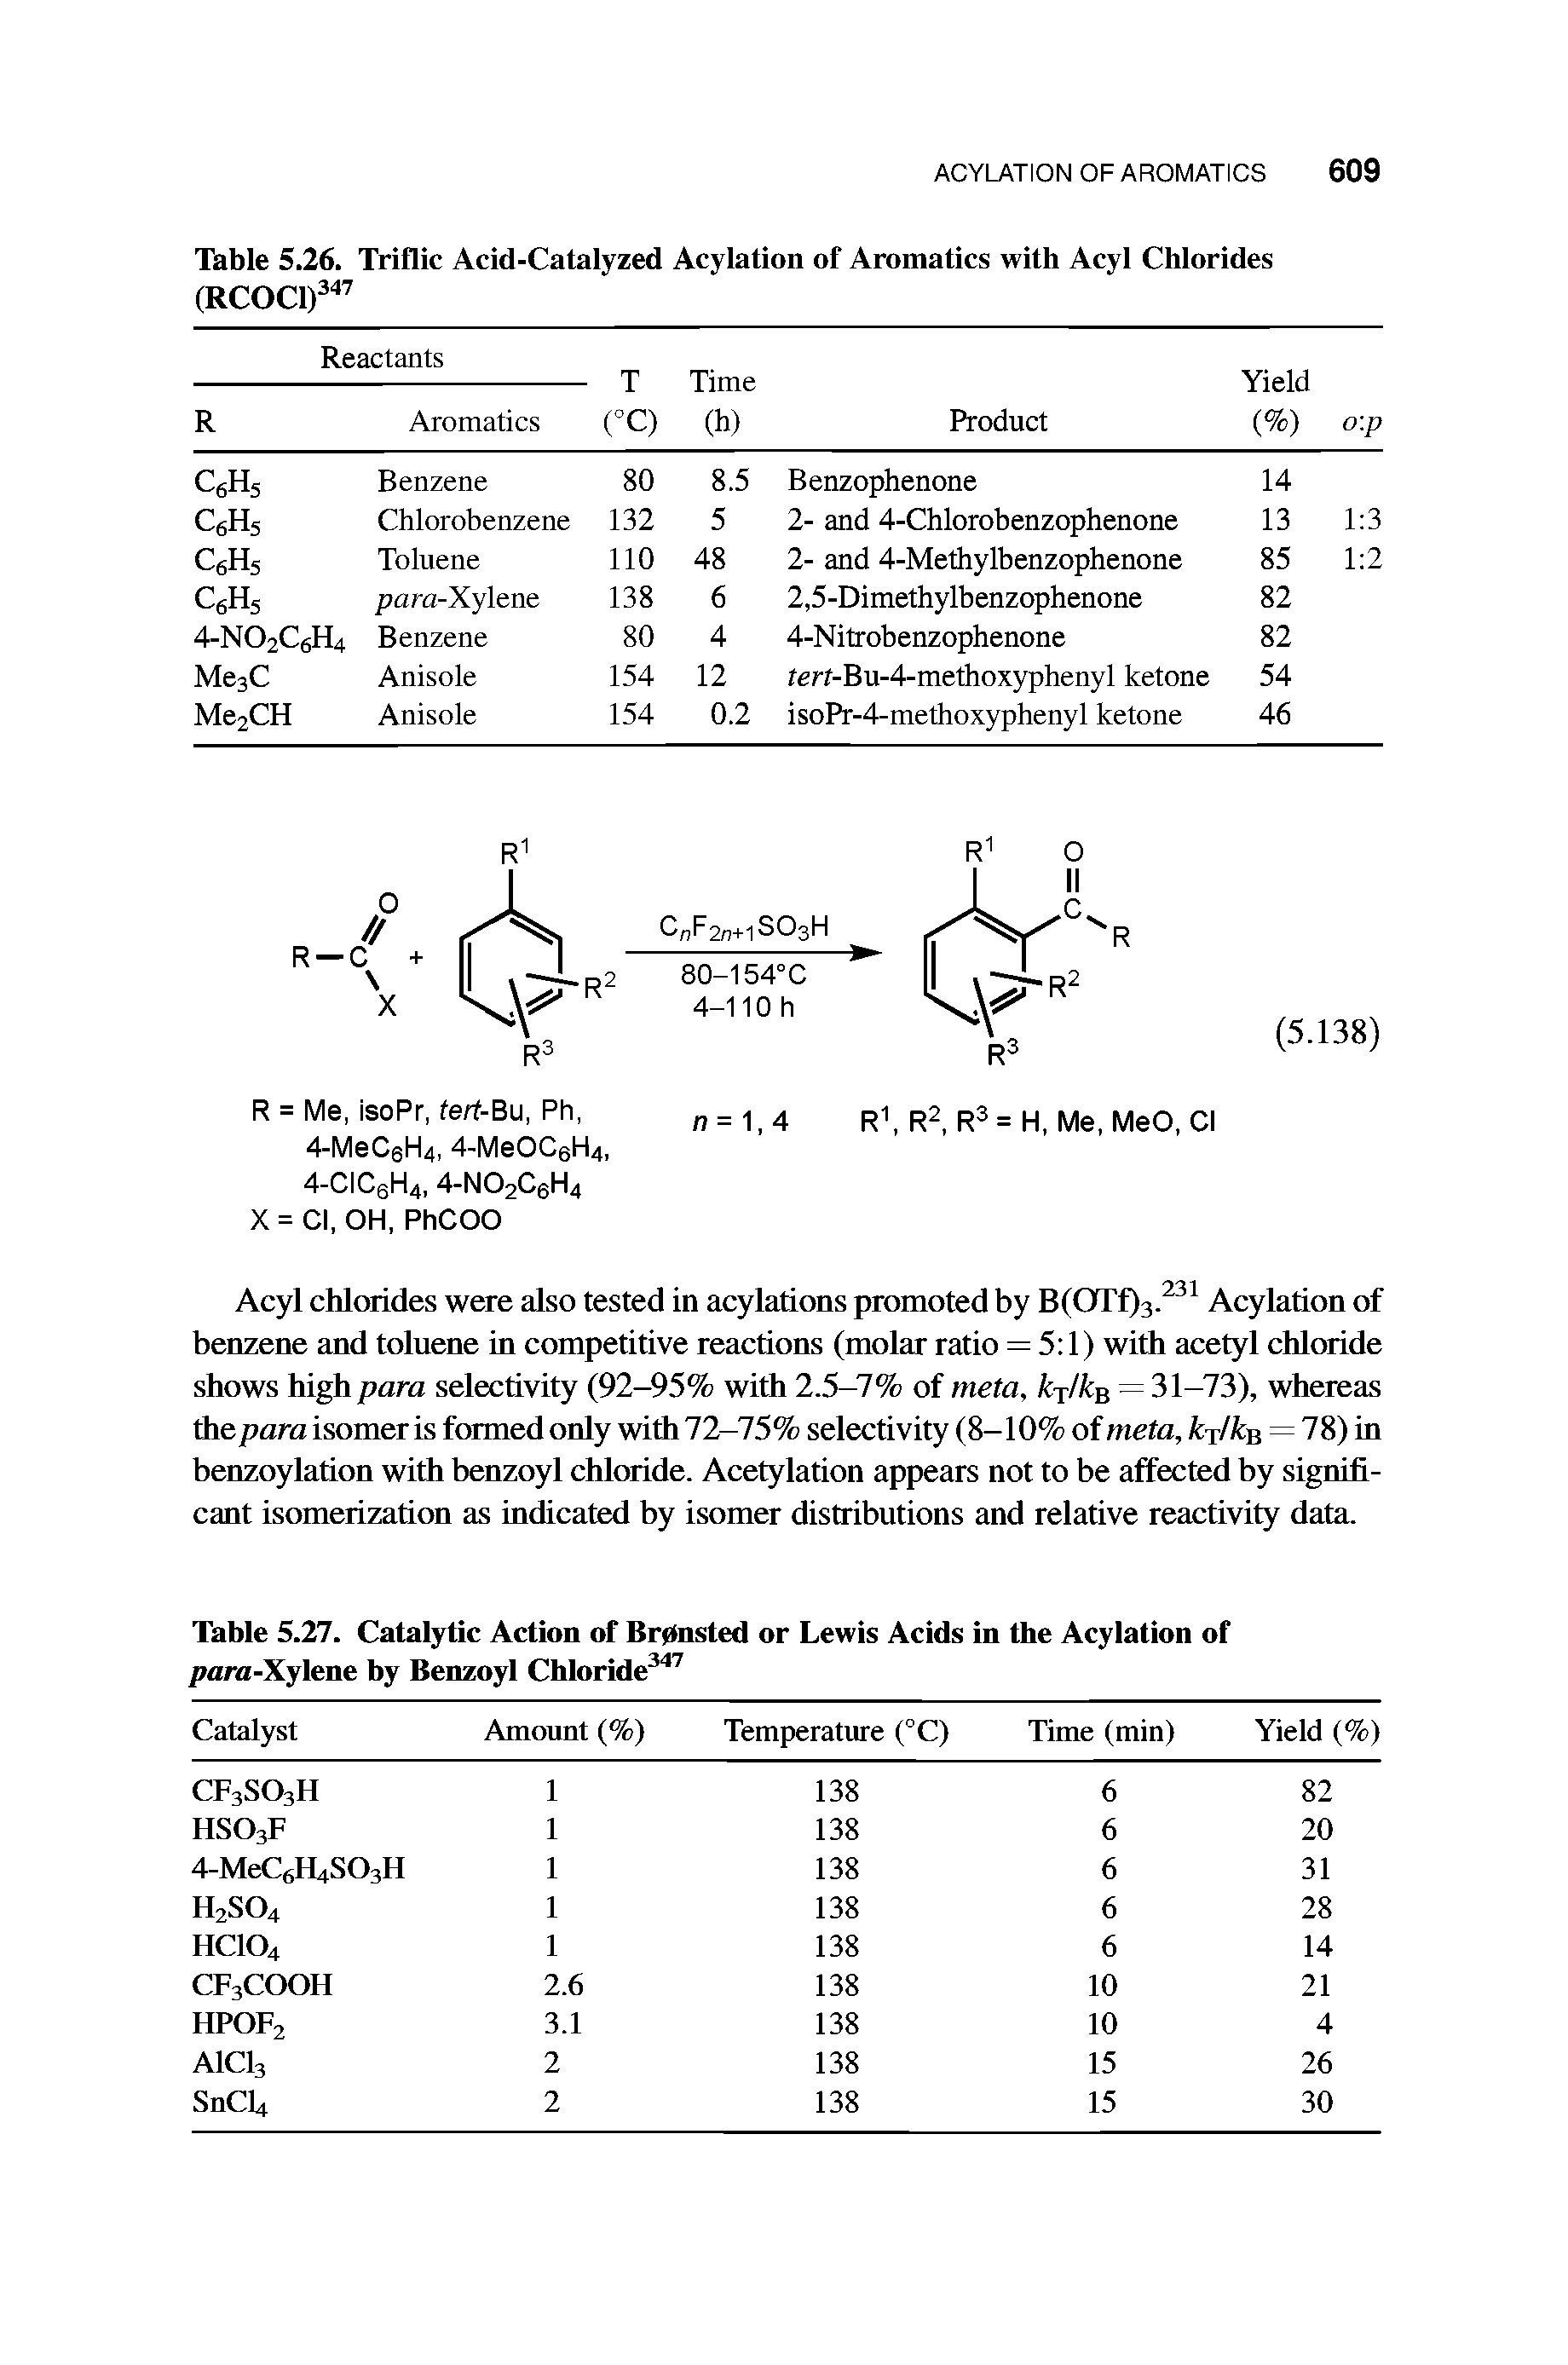 Table 5.27. Catalytic Action of Brdnsted or Lewis Acids in the Acylation of para-Xylene by Benzoyl Chloride347...